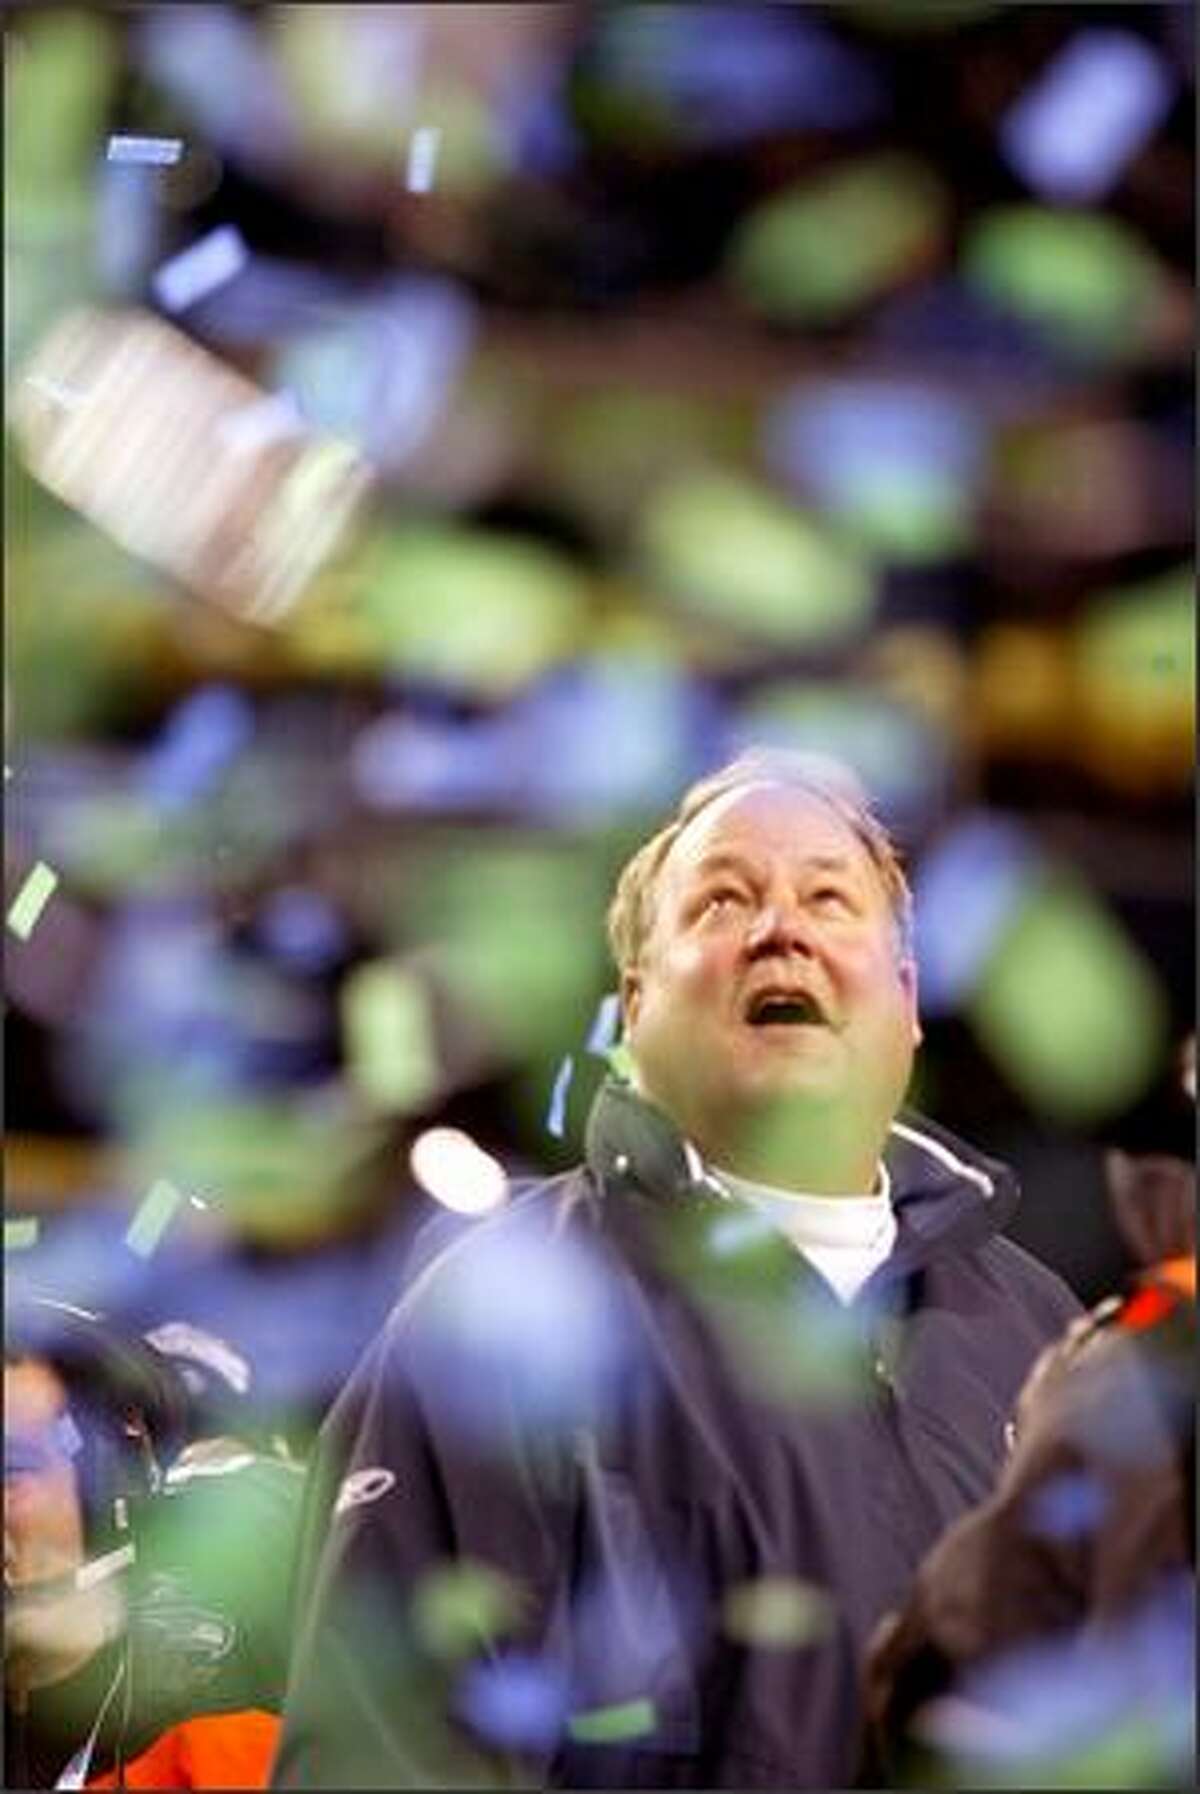 Coach Mike Holmgren watches as confetti falls during the trophy presentation ceremony after the Seahawks won the NFC Championship.